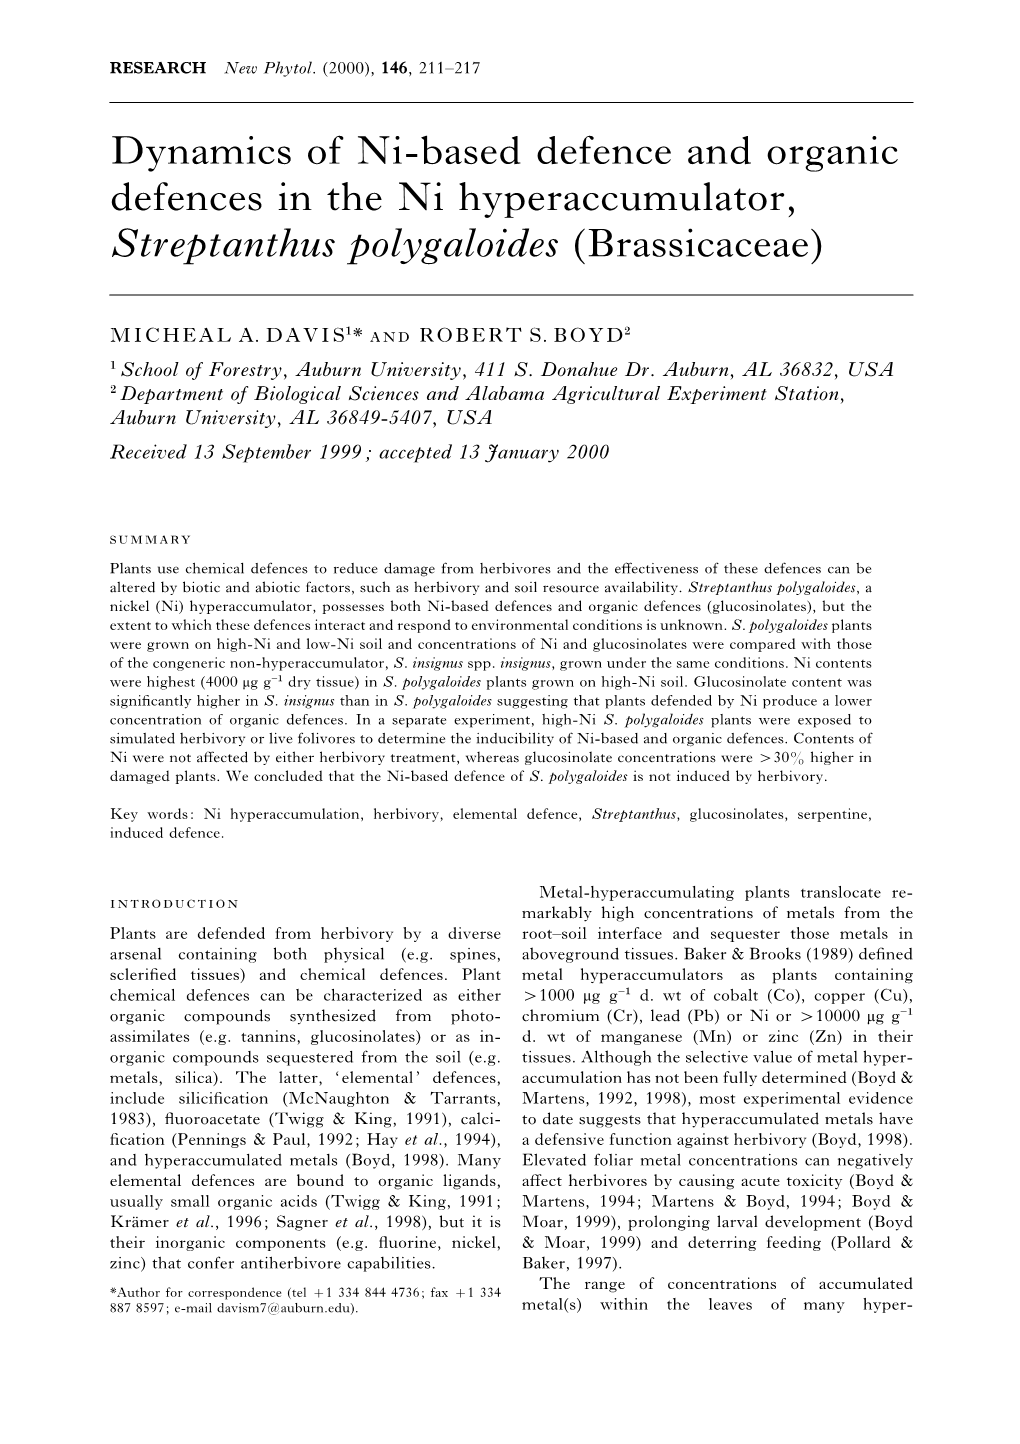 Dynamics of Ni-Based Defence and Organic Defences in the Ni Hyperaccumulator, Streptanthus Polygaloides (Brassicaceae)